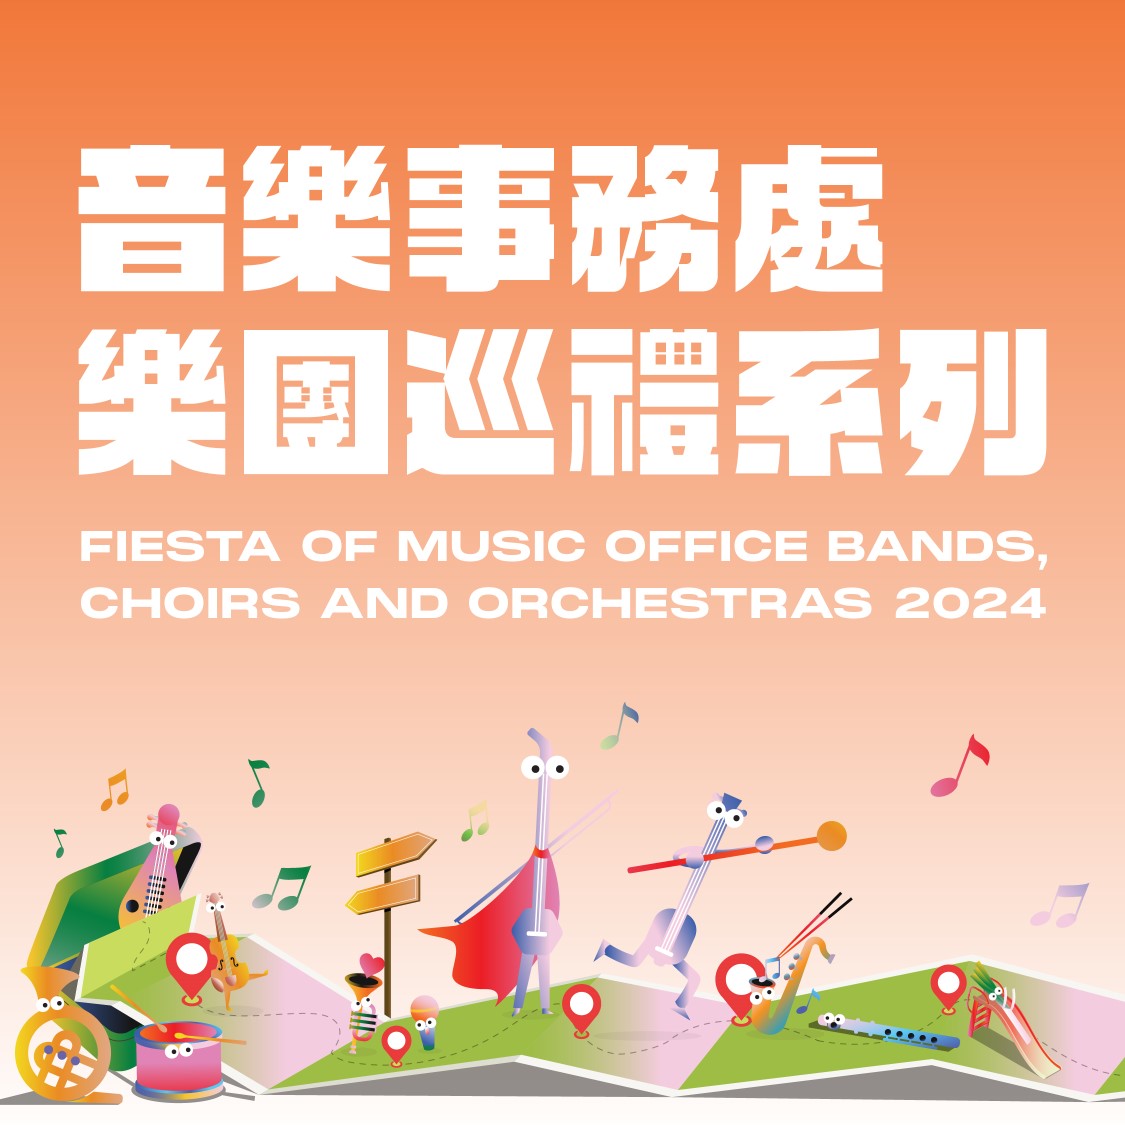 2024 Fiesta of Music Office Bands, Choirs and Orchestras